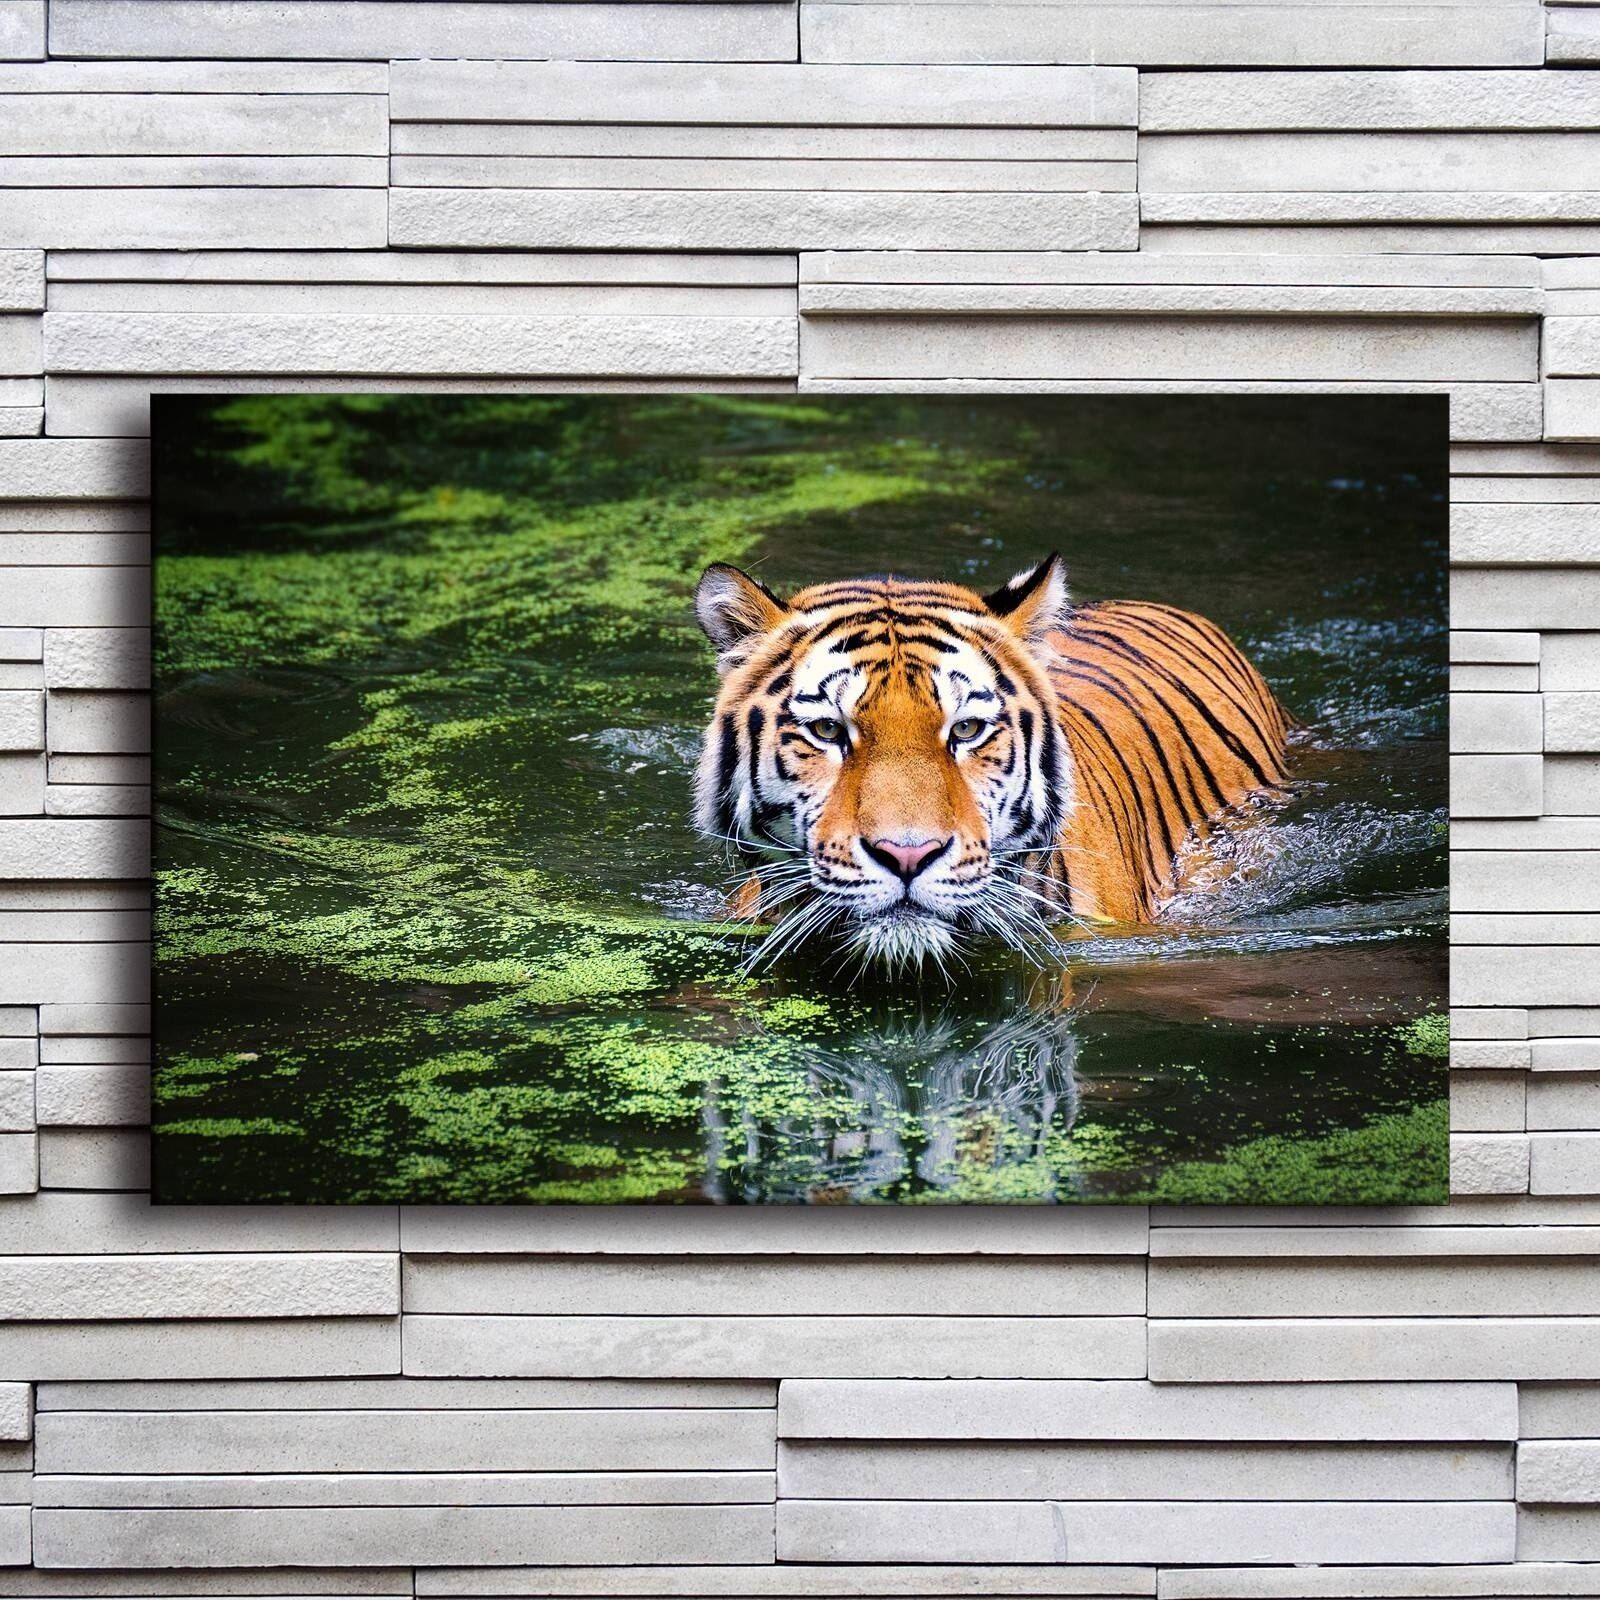 Brand New Canvas Prints Painting Living Room Wall Art 1 For Tiger Wall Art (View 6 of 15)